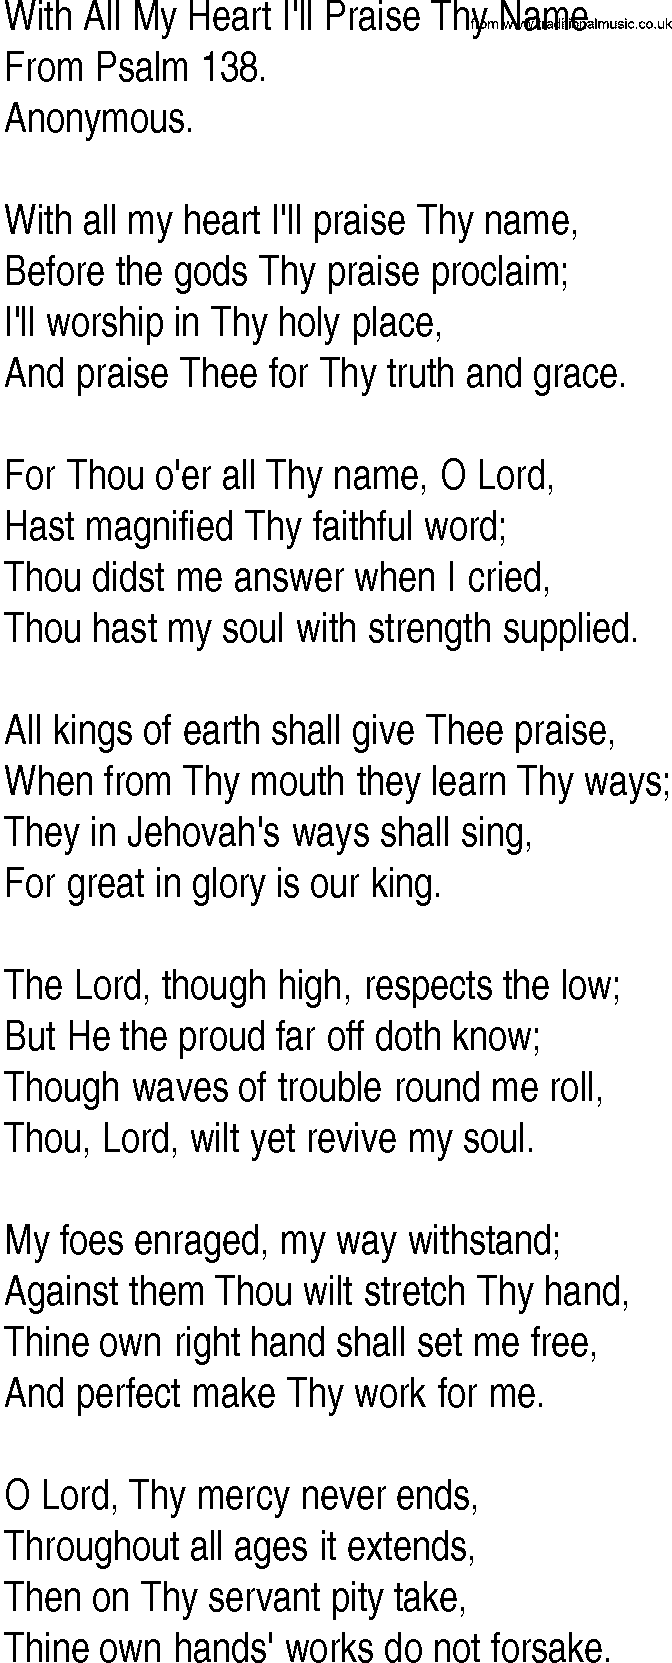 Hymn and Gospel Song: With All My Heart I'll Praise Thy Name by From Psalm lyrics